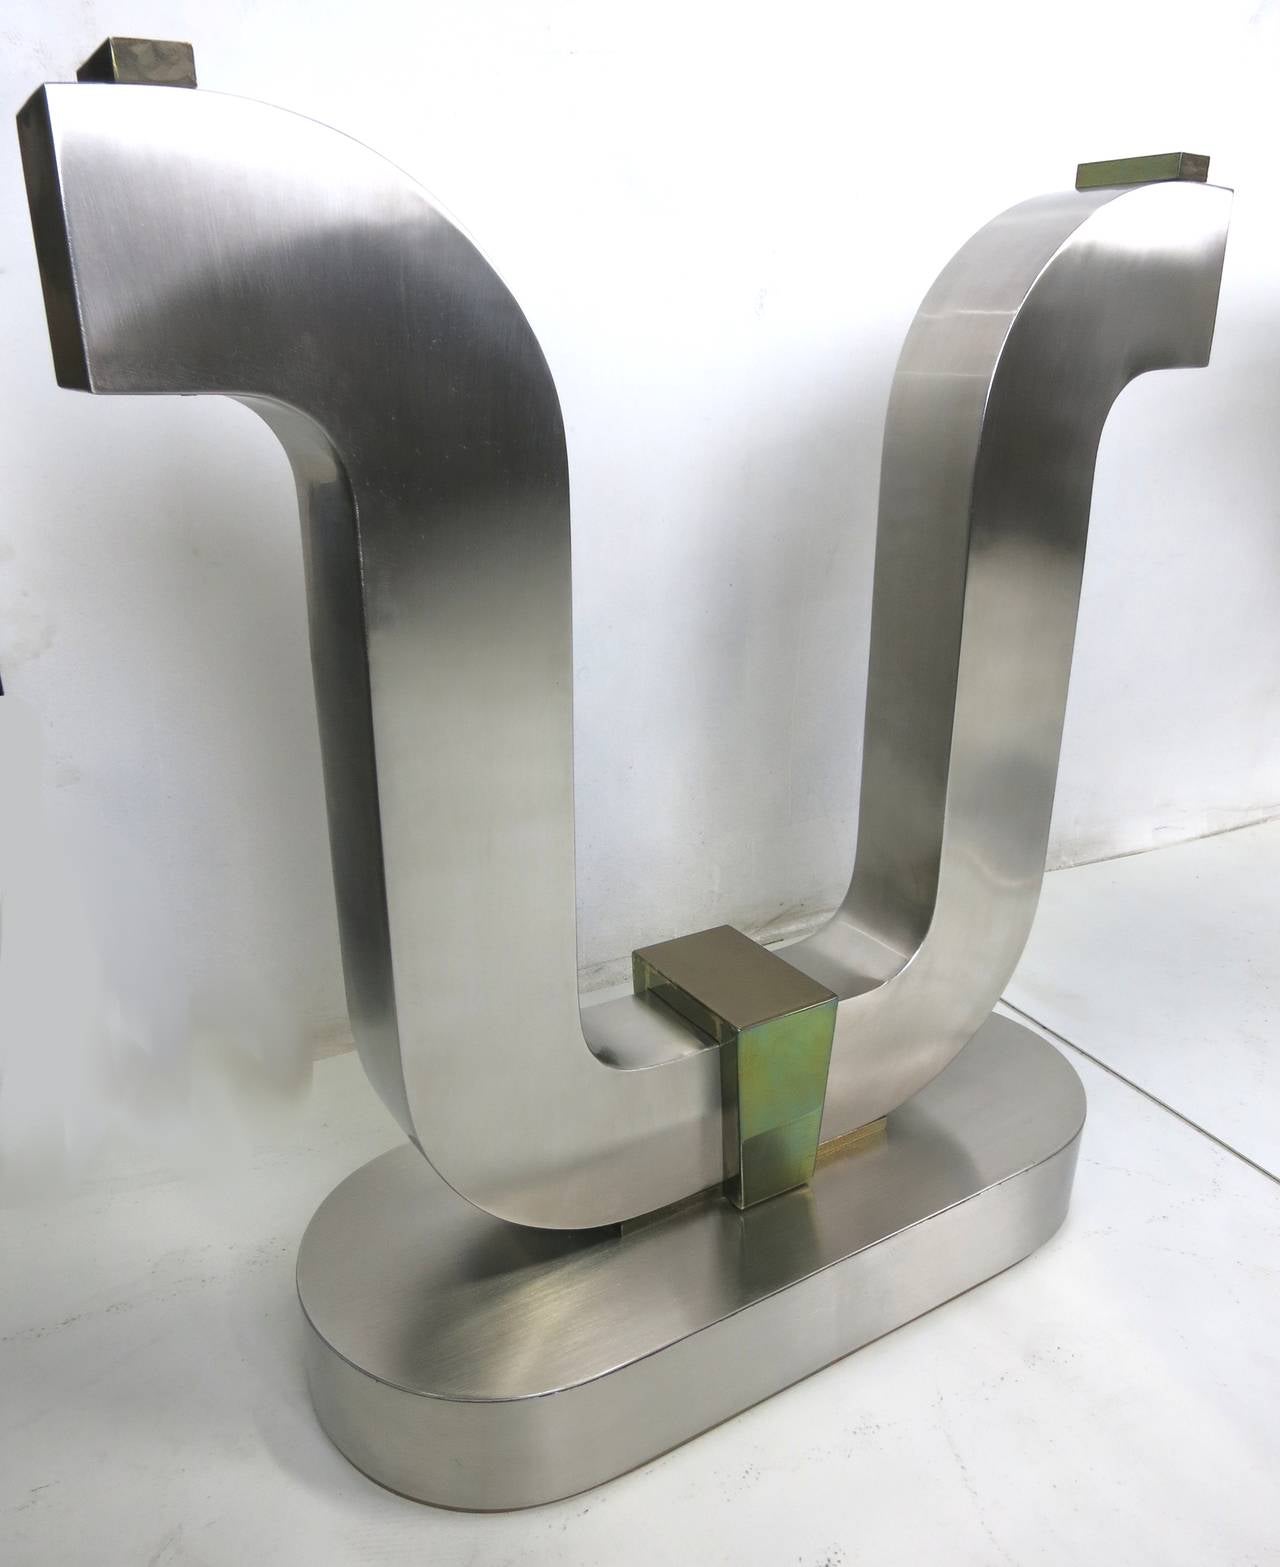 Impressive pair of large scale brushed steel table bases consisting of harp form supports raised on oval plinths with solid brass footings.  Top quality materials and workmanship with seamless welds on all pieces reminiscent of similar items by Jay